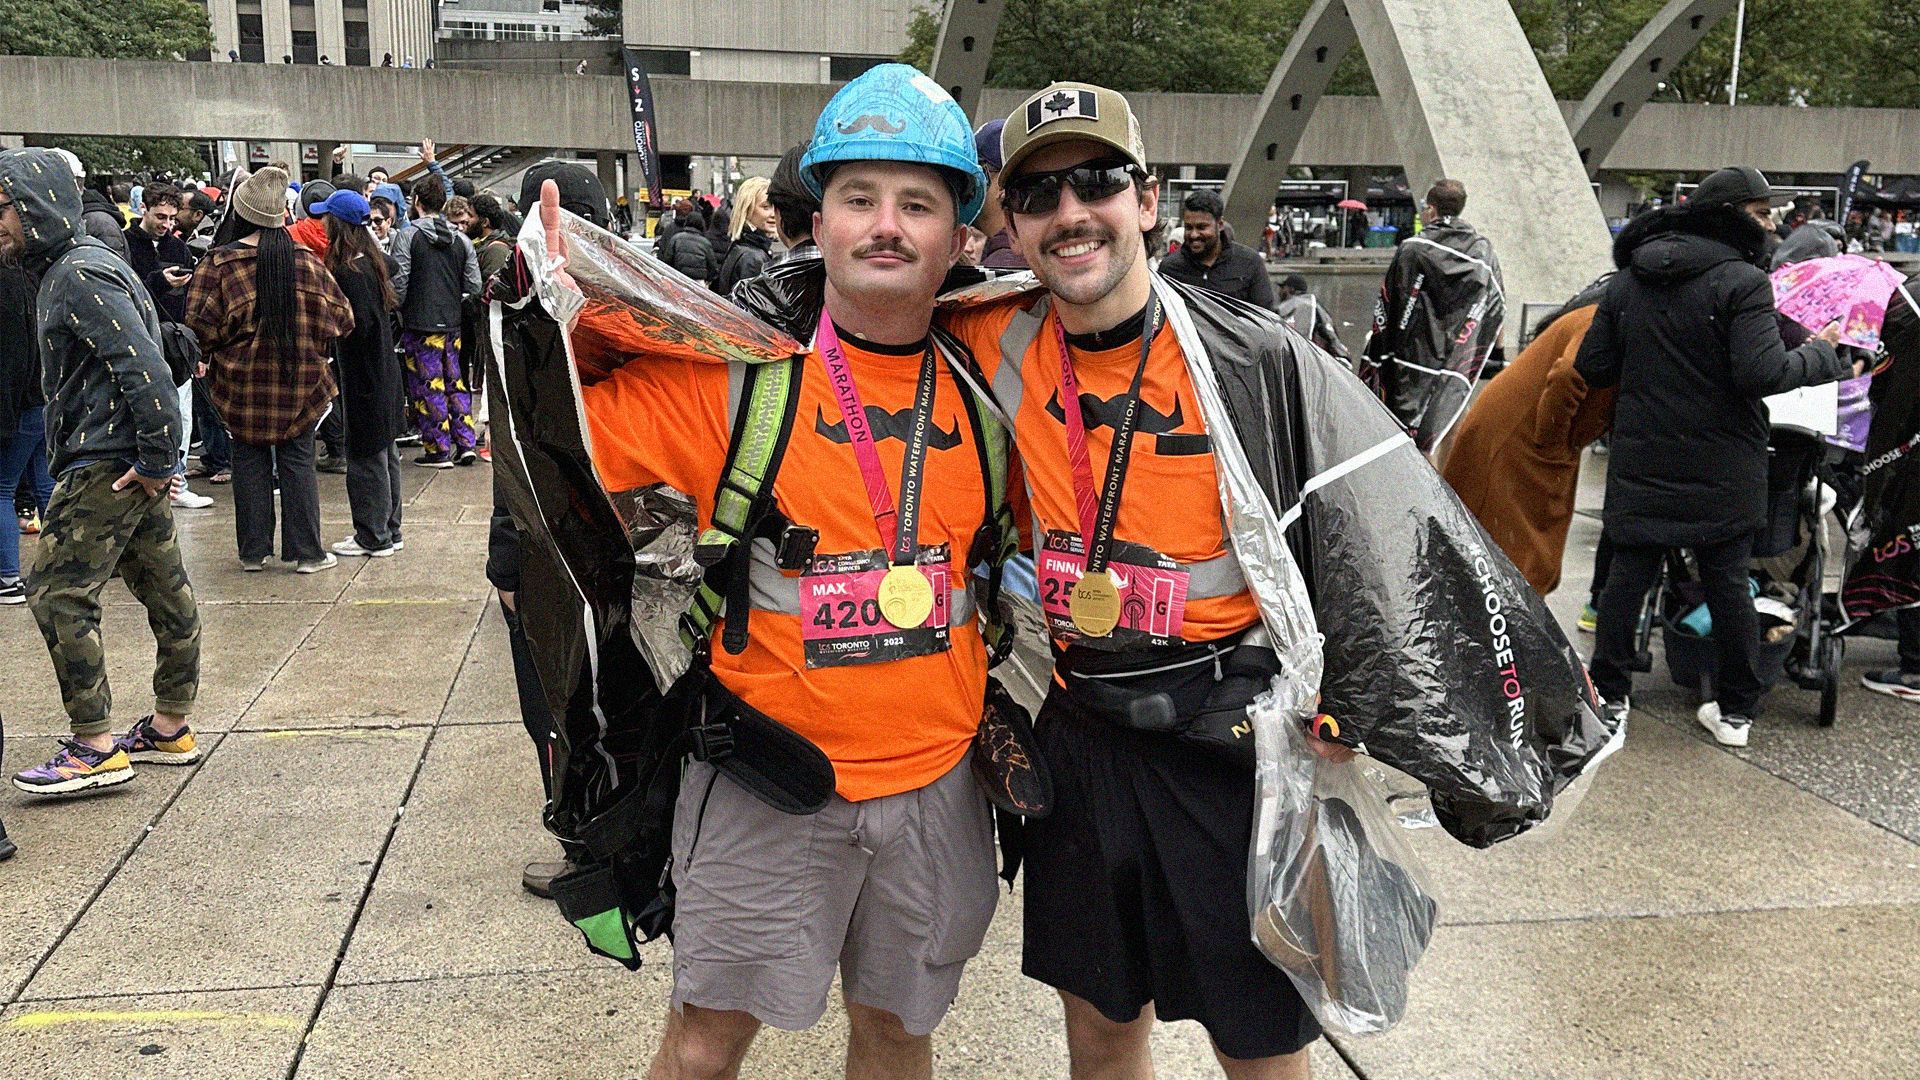 Two moustachioed men wearing construction gear pose at the end of a marathon run they've just completed in Toronto